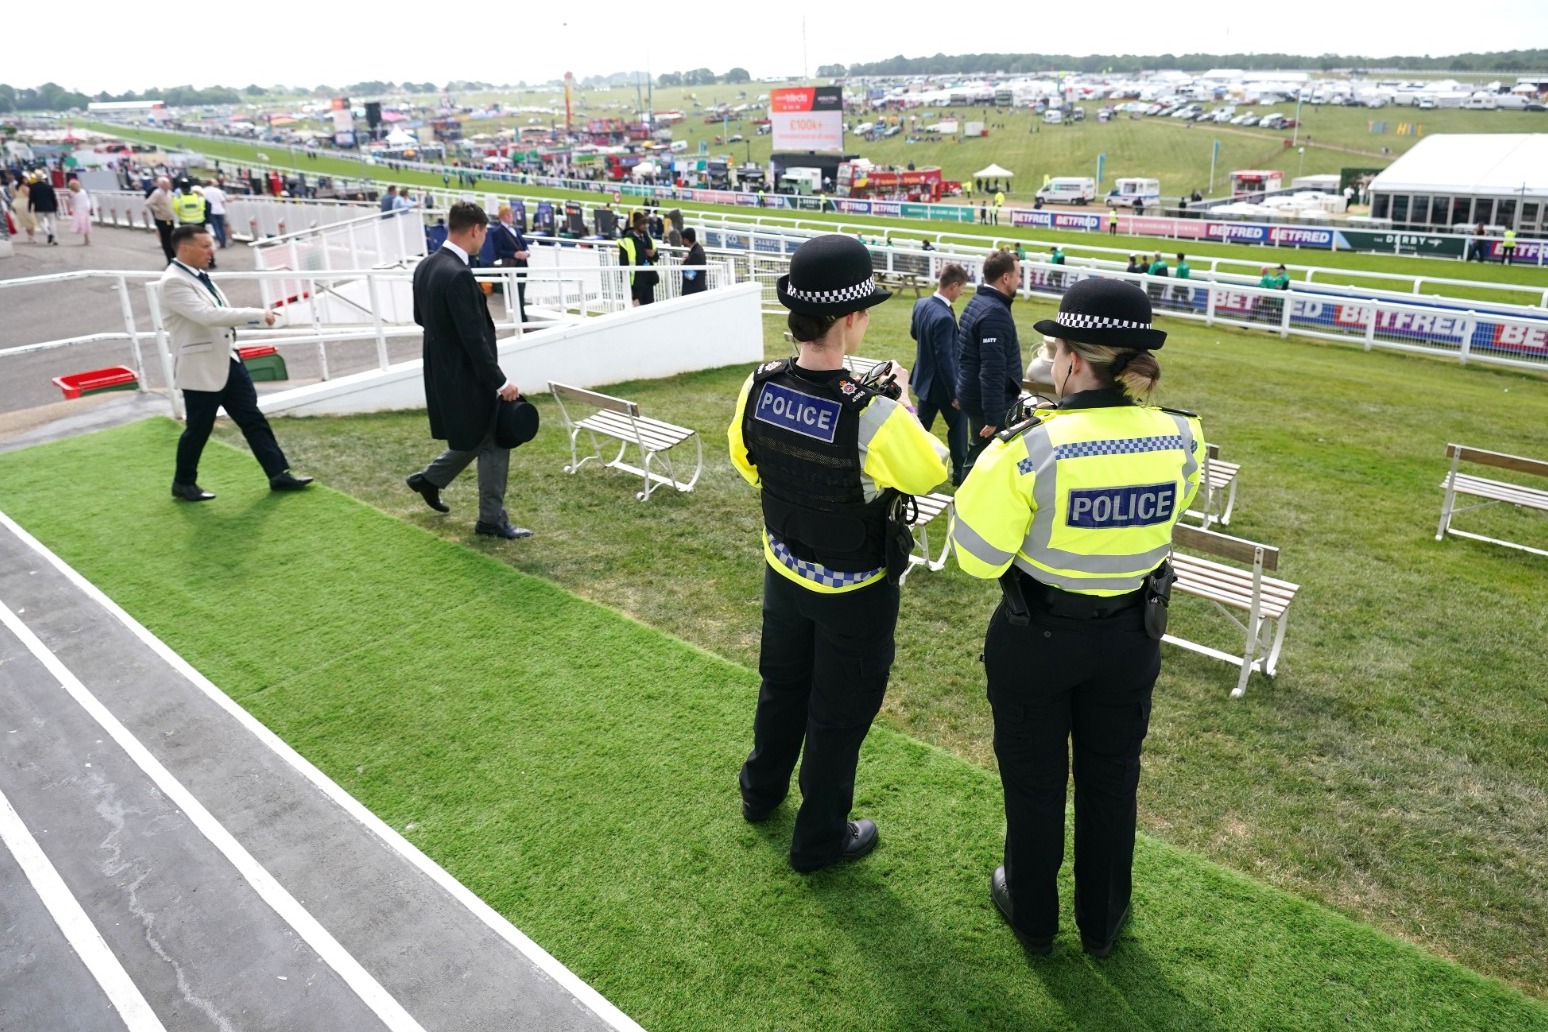 Nineteen arrested ahead of Derby day 